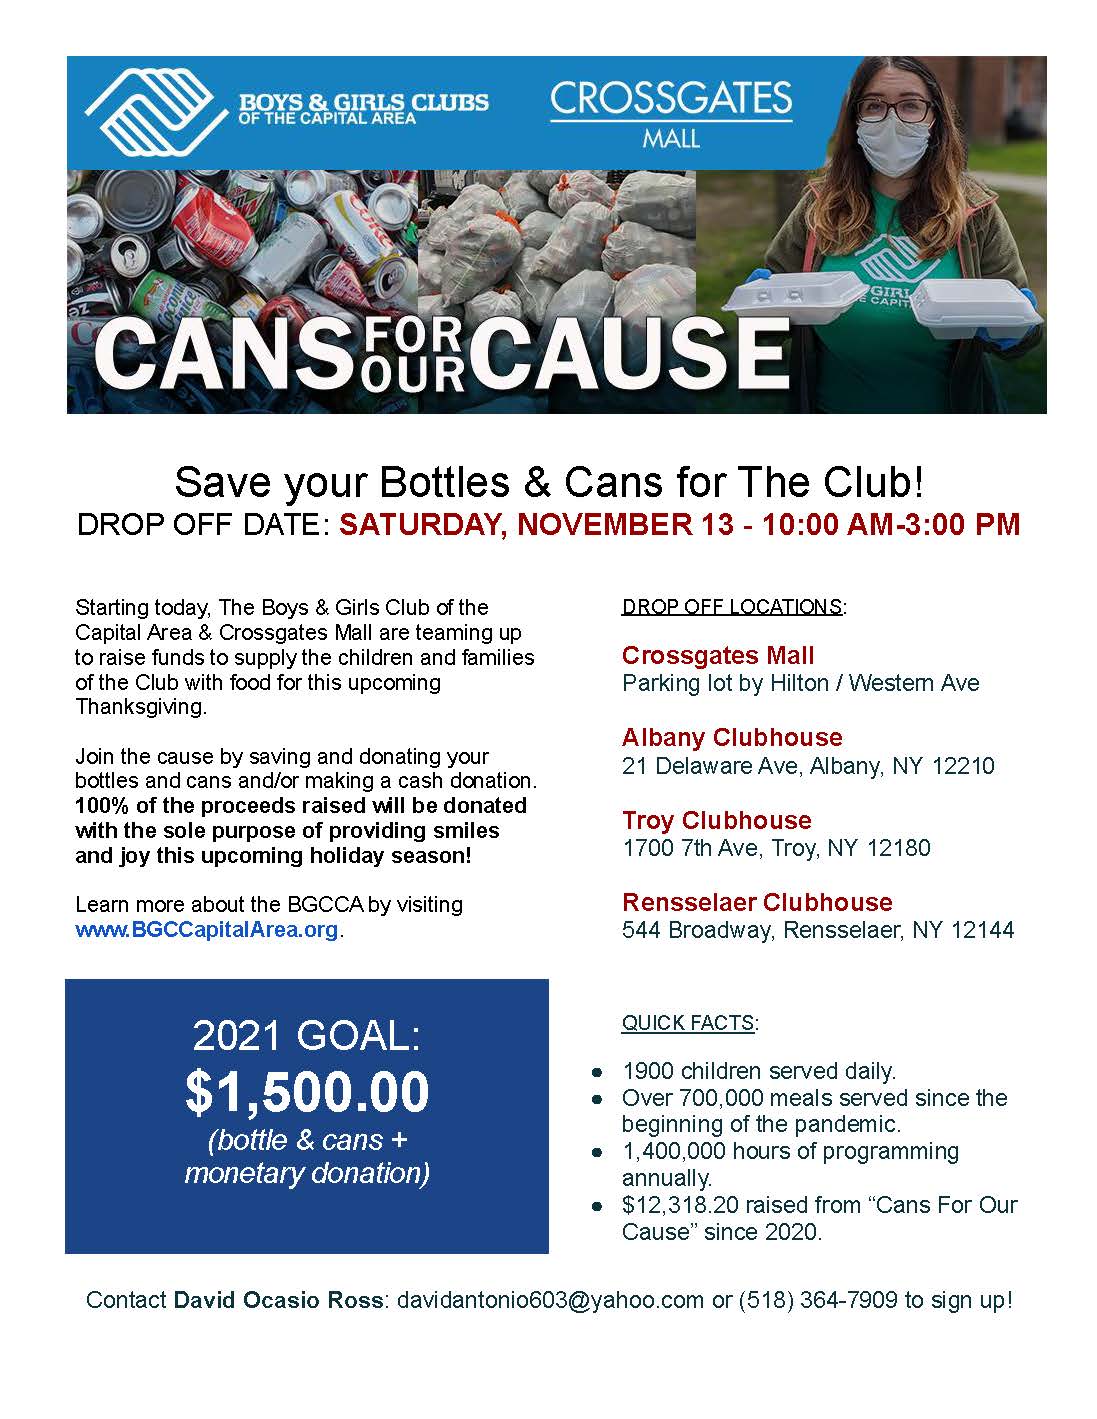 2021 Cans for our Cause